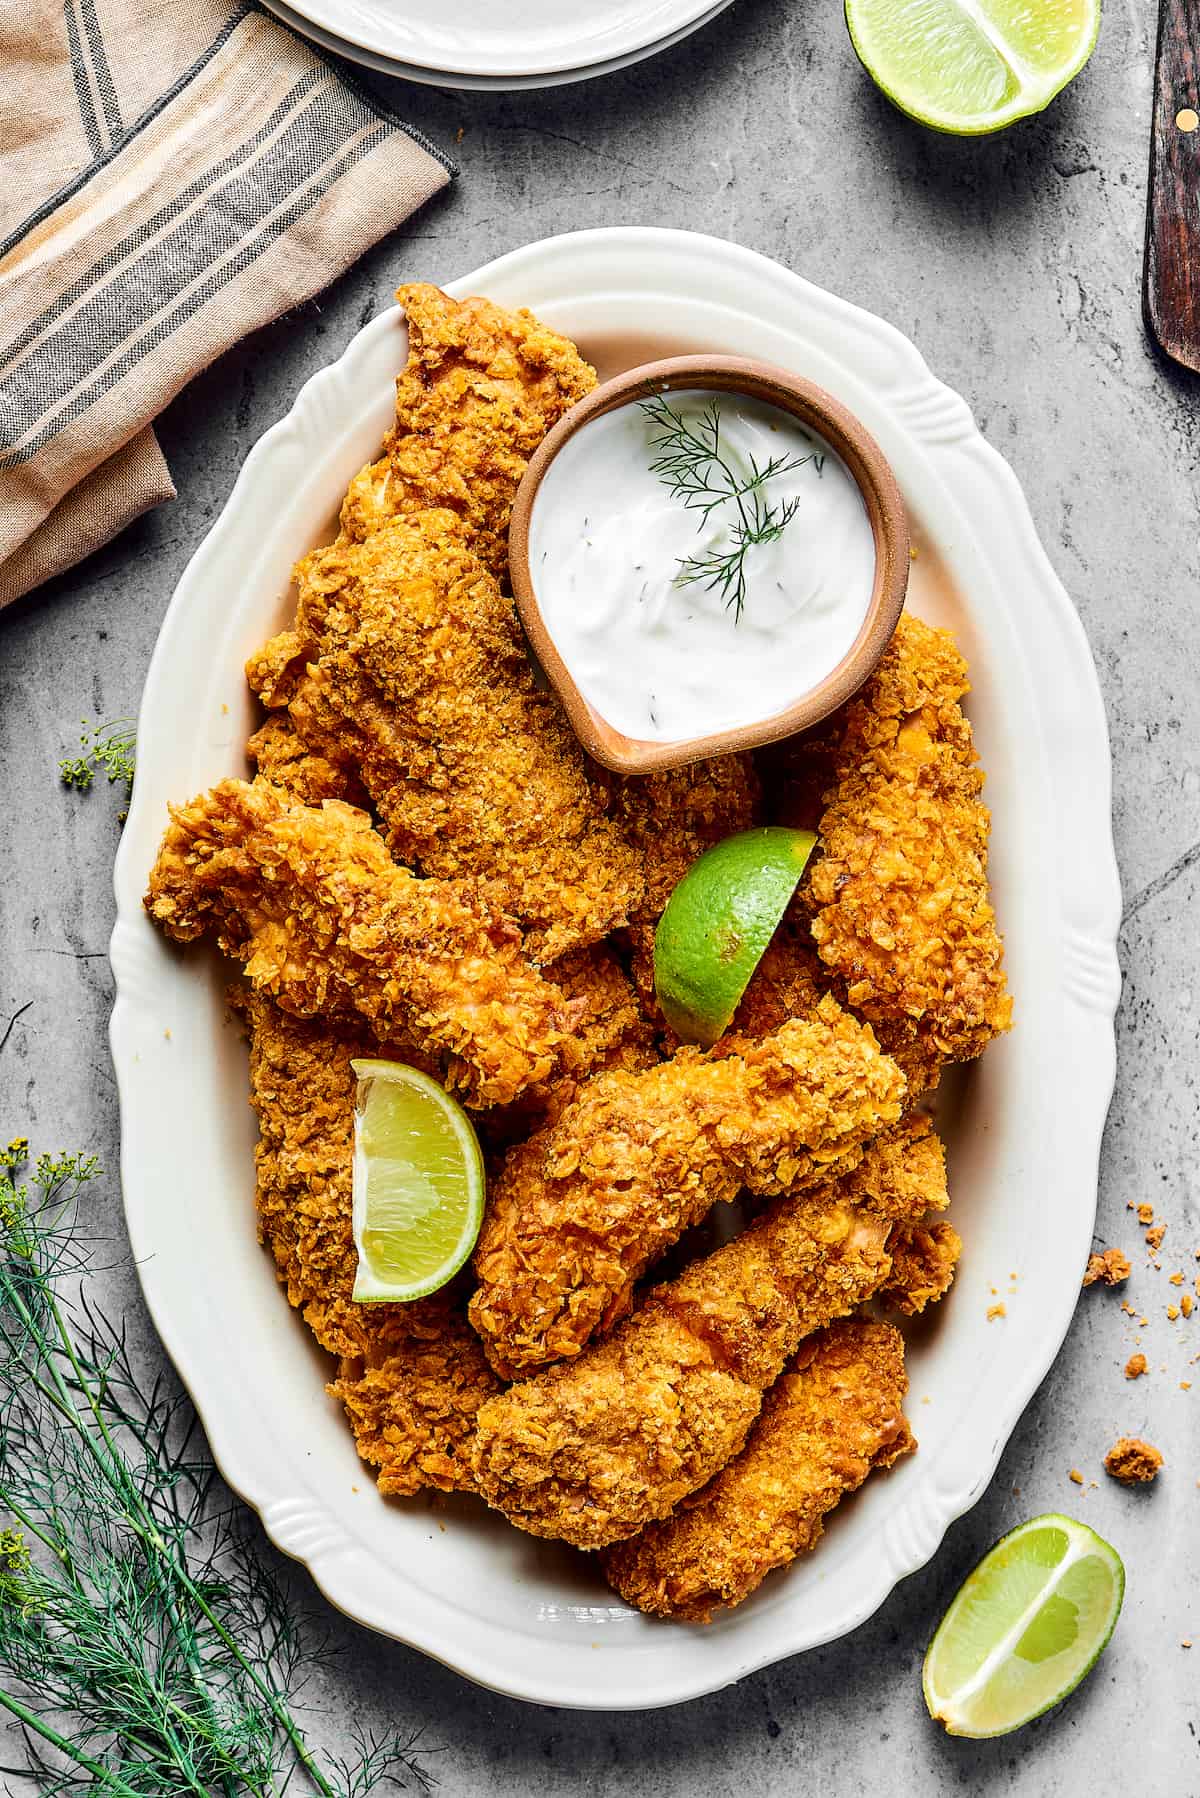 Air-fried chicken pieces on a platter garnished with lime wedges and a small dish of dipping sauce.